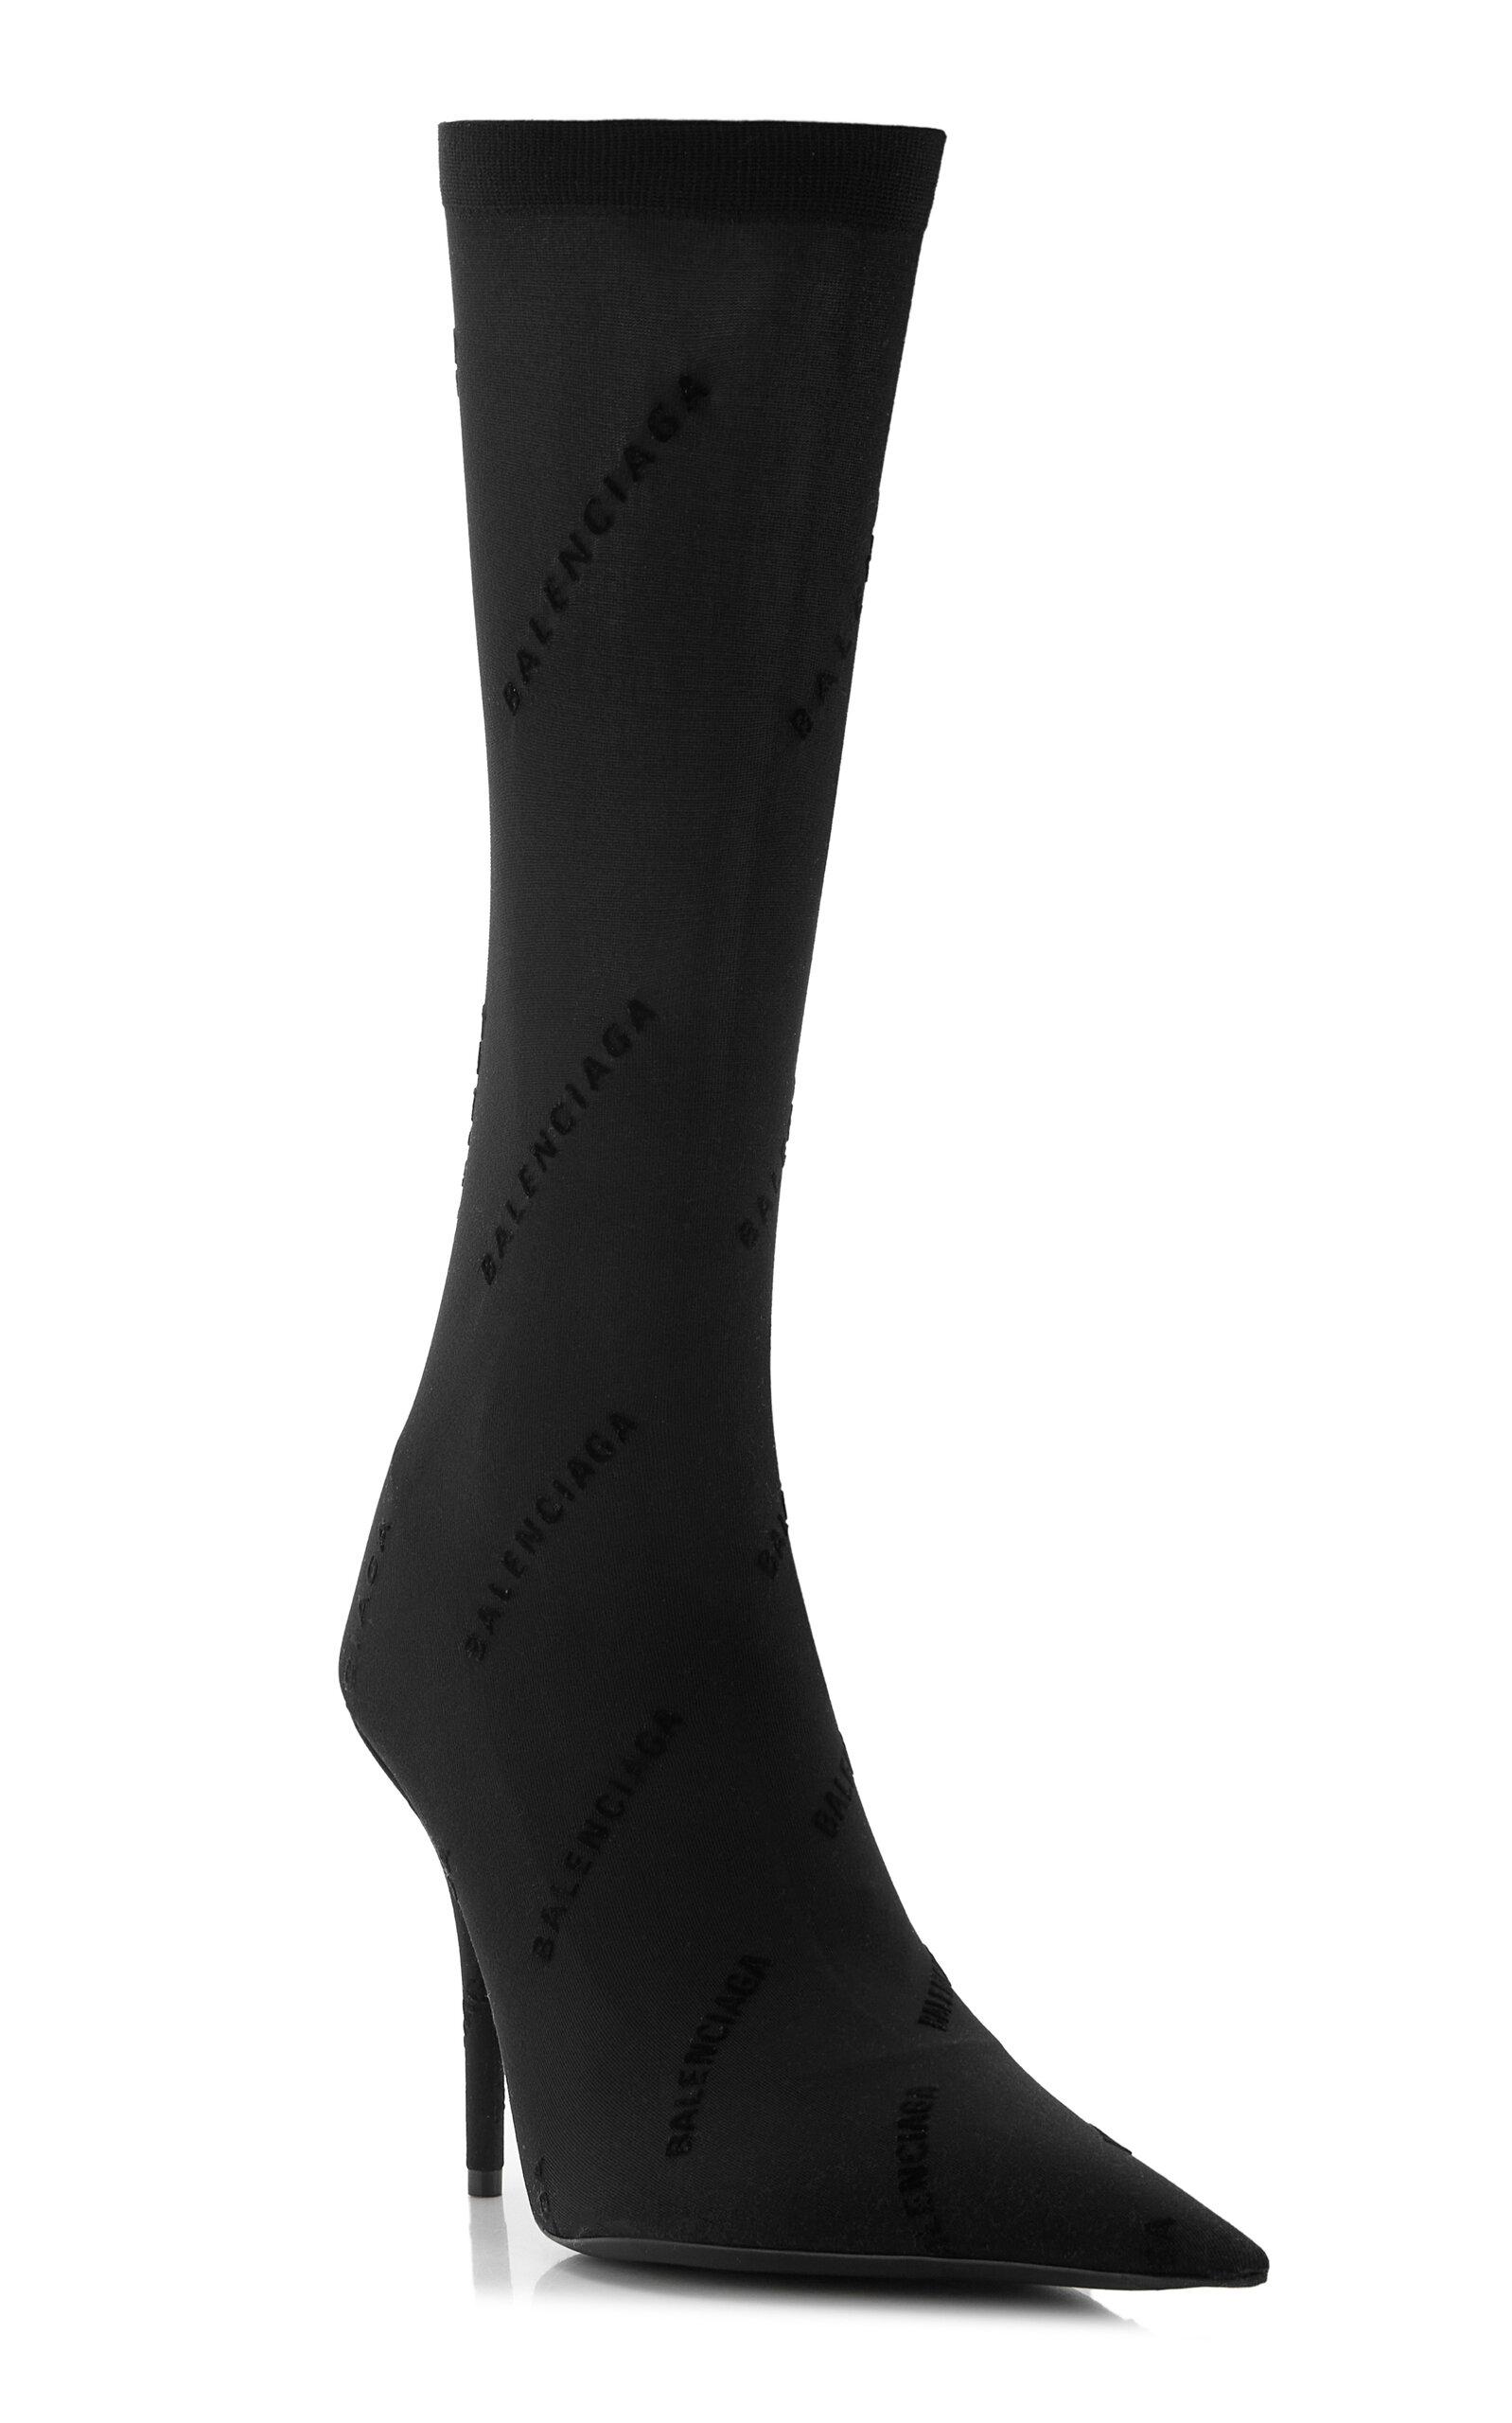 Balenciaga Naked Knife Knit Ankle Boots in Black | Lyst